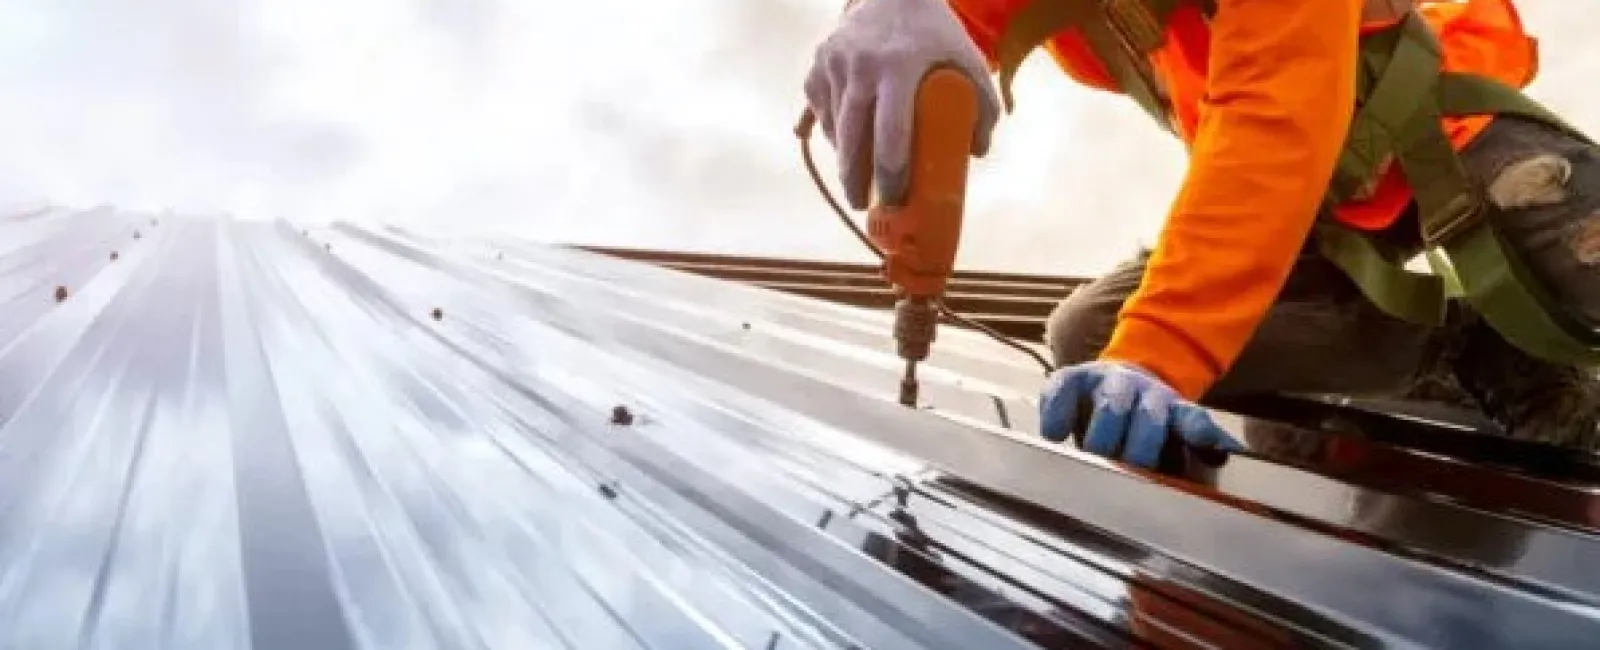 connecticut roofer installing metal roofing